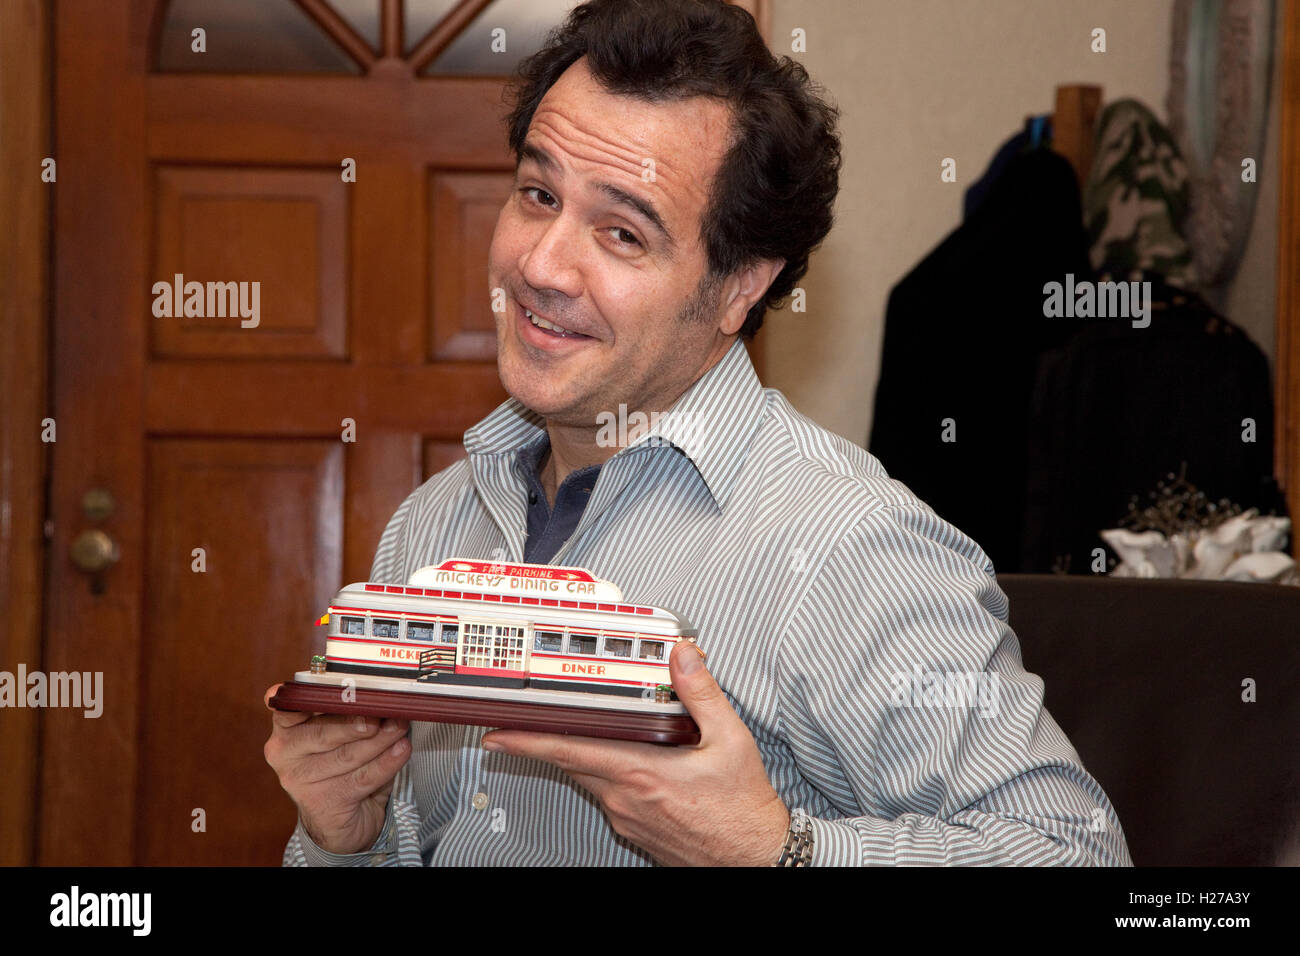 Man age 48 holding a replica of Mickey's diner in his hands. St Paul Minnesota MN USA Stock Photo